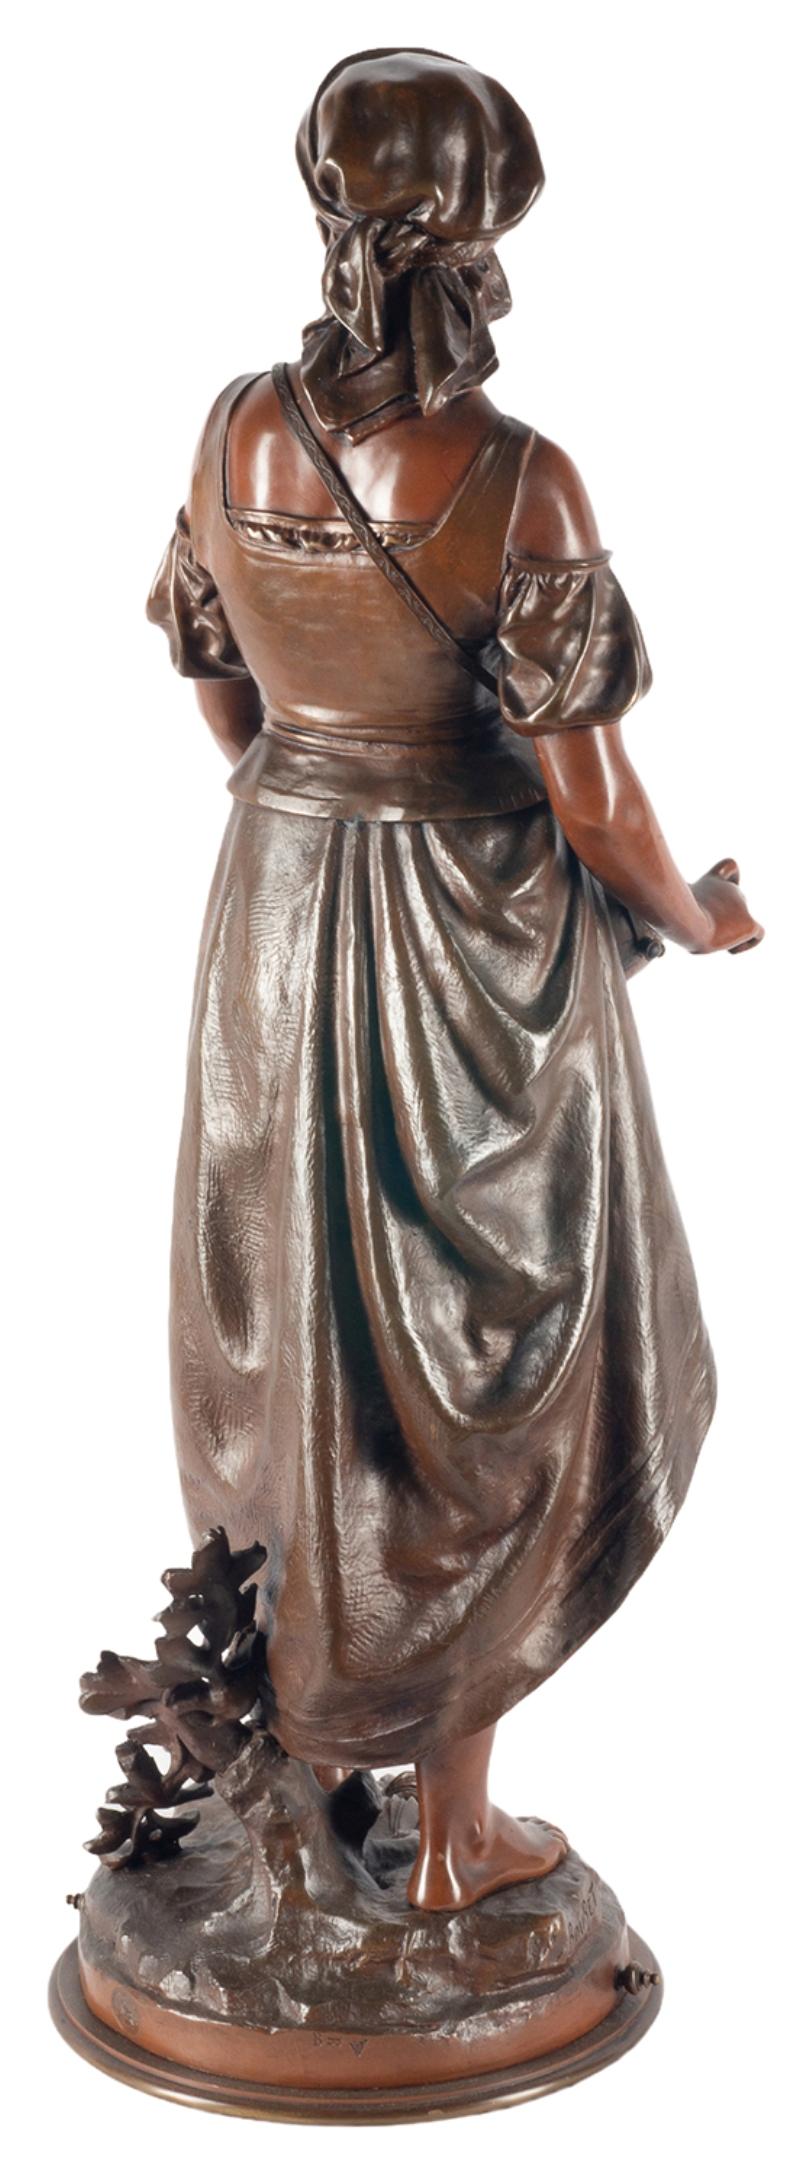 Eutrope Bouret Bronze Statue of Gypsy Girl Musician In Good Condition For Sale In Brighton, Sussex